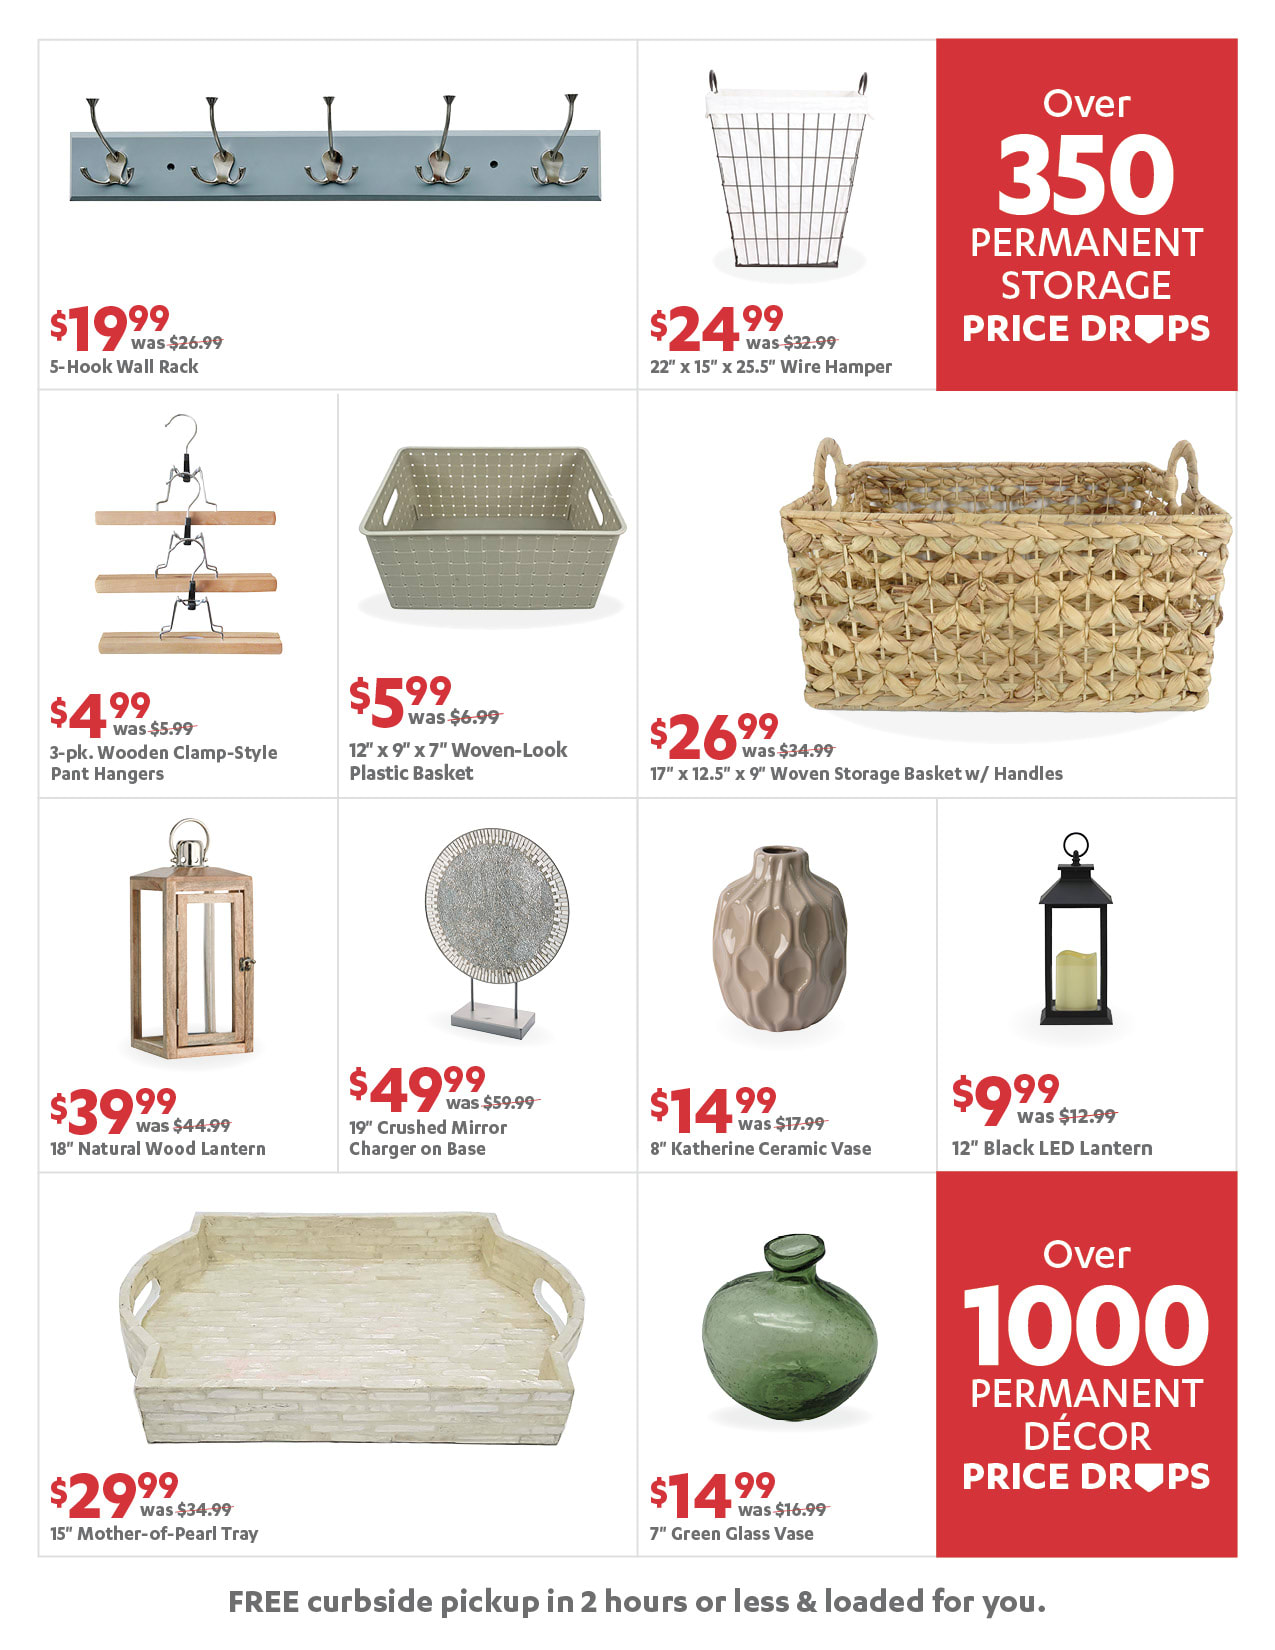 Weekly Ad, Home Decor Weekly Deals & Price Drops